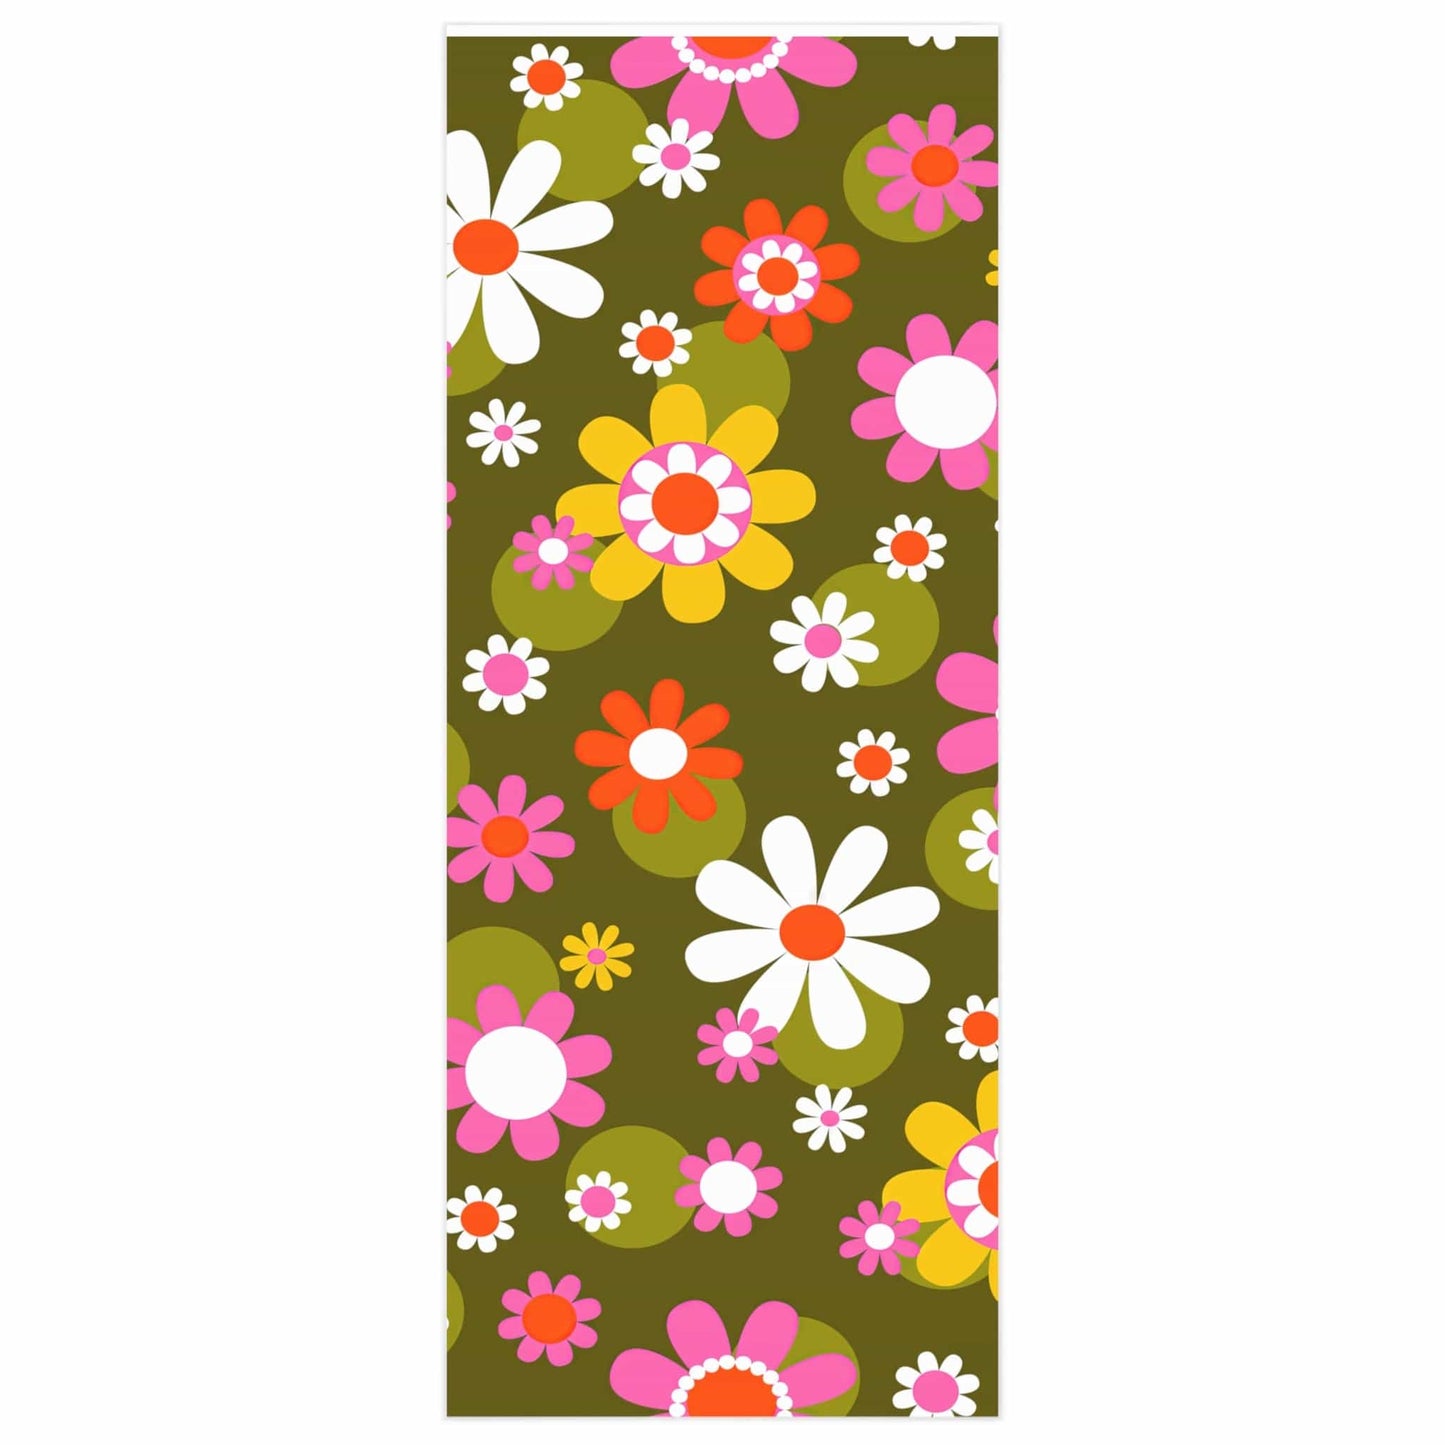 Printify Groovy Hippie Daisy Flower Power Wrapping Paper, Mid Century Modern Retro Gift Wrap Home Decor